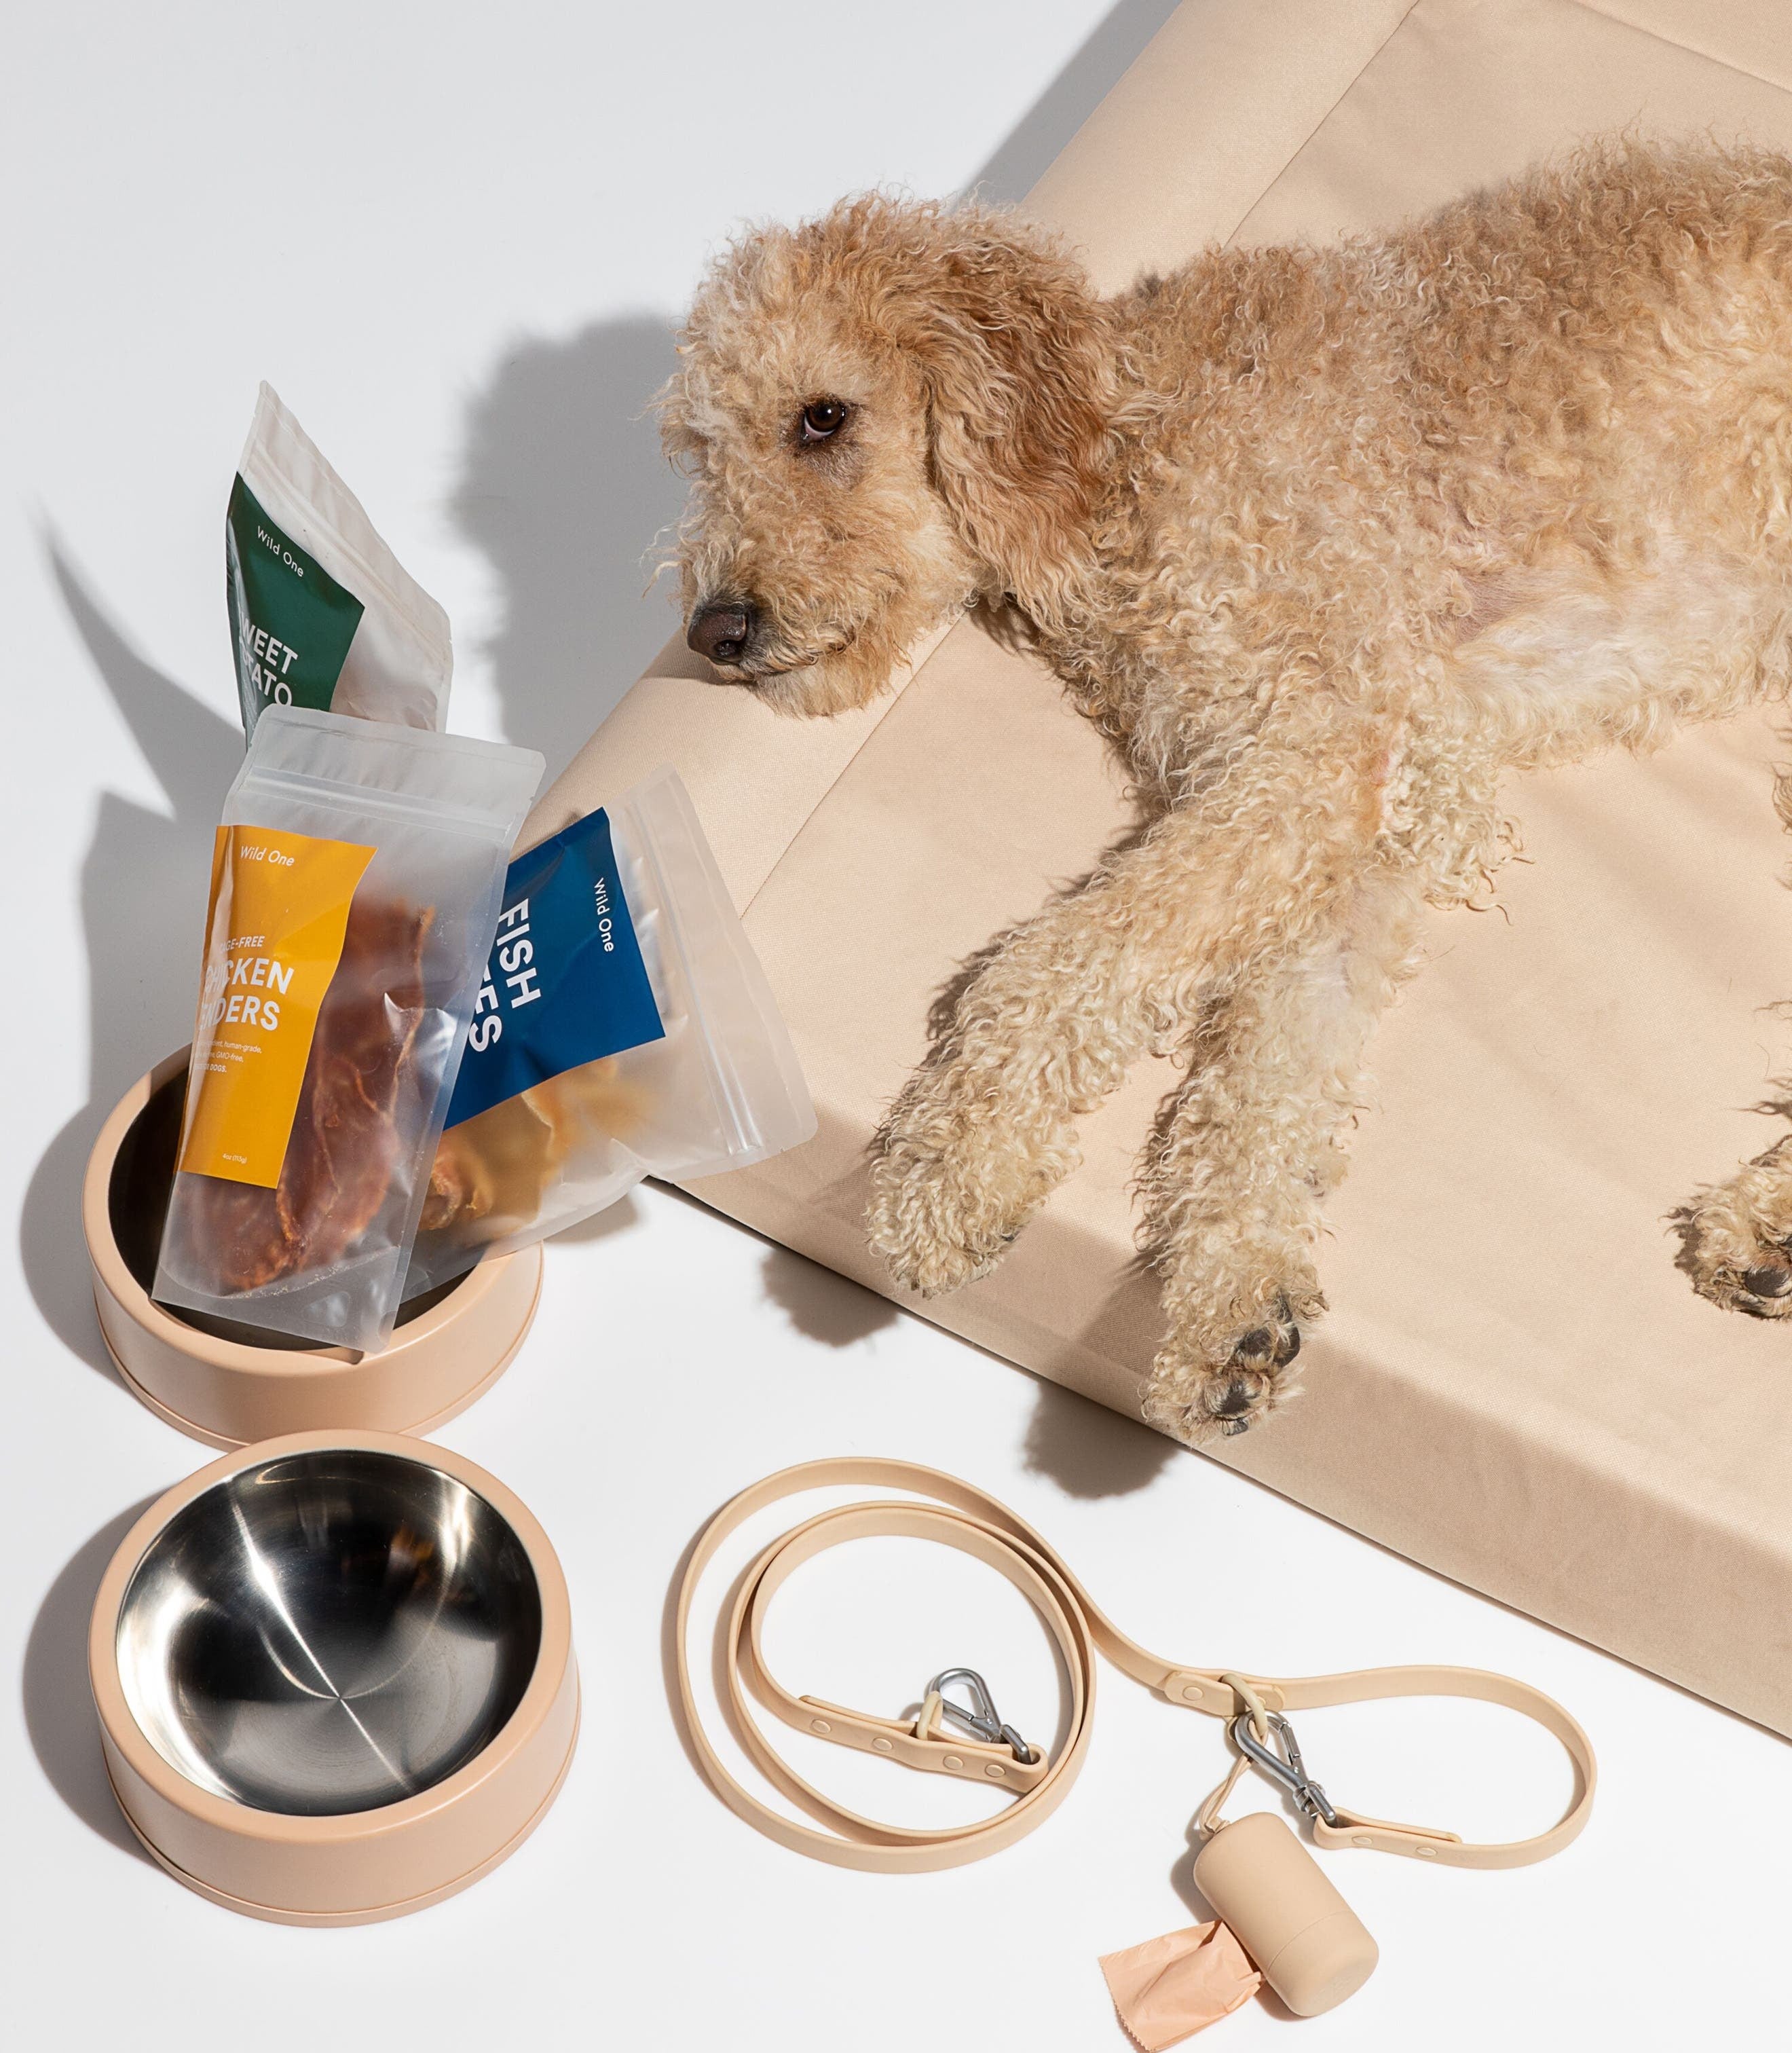 golden doodle on a dog bed lying next to dog bowls and other dog accessories